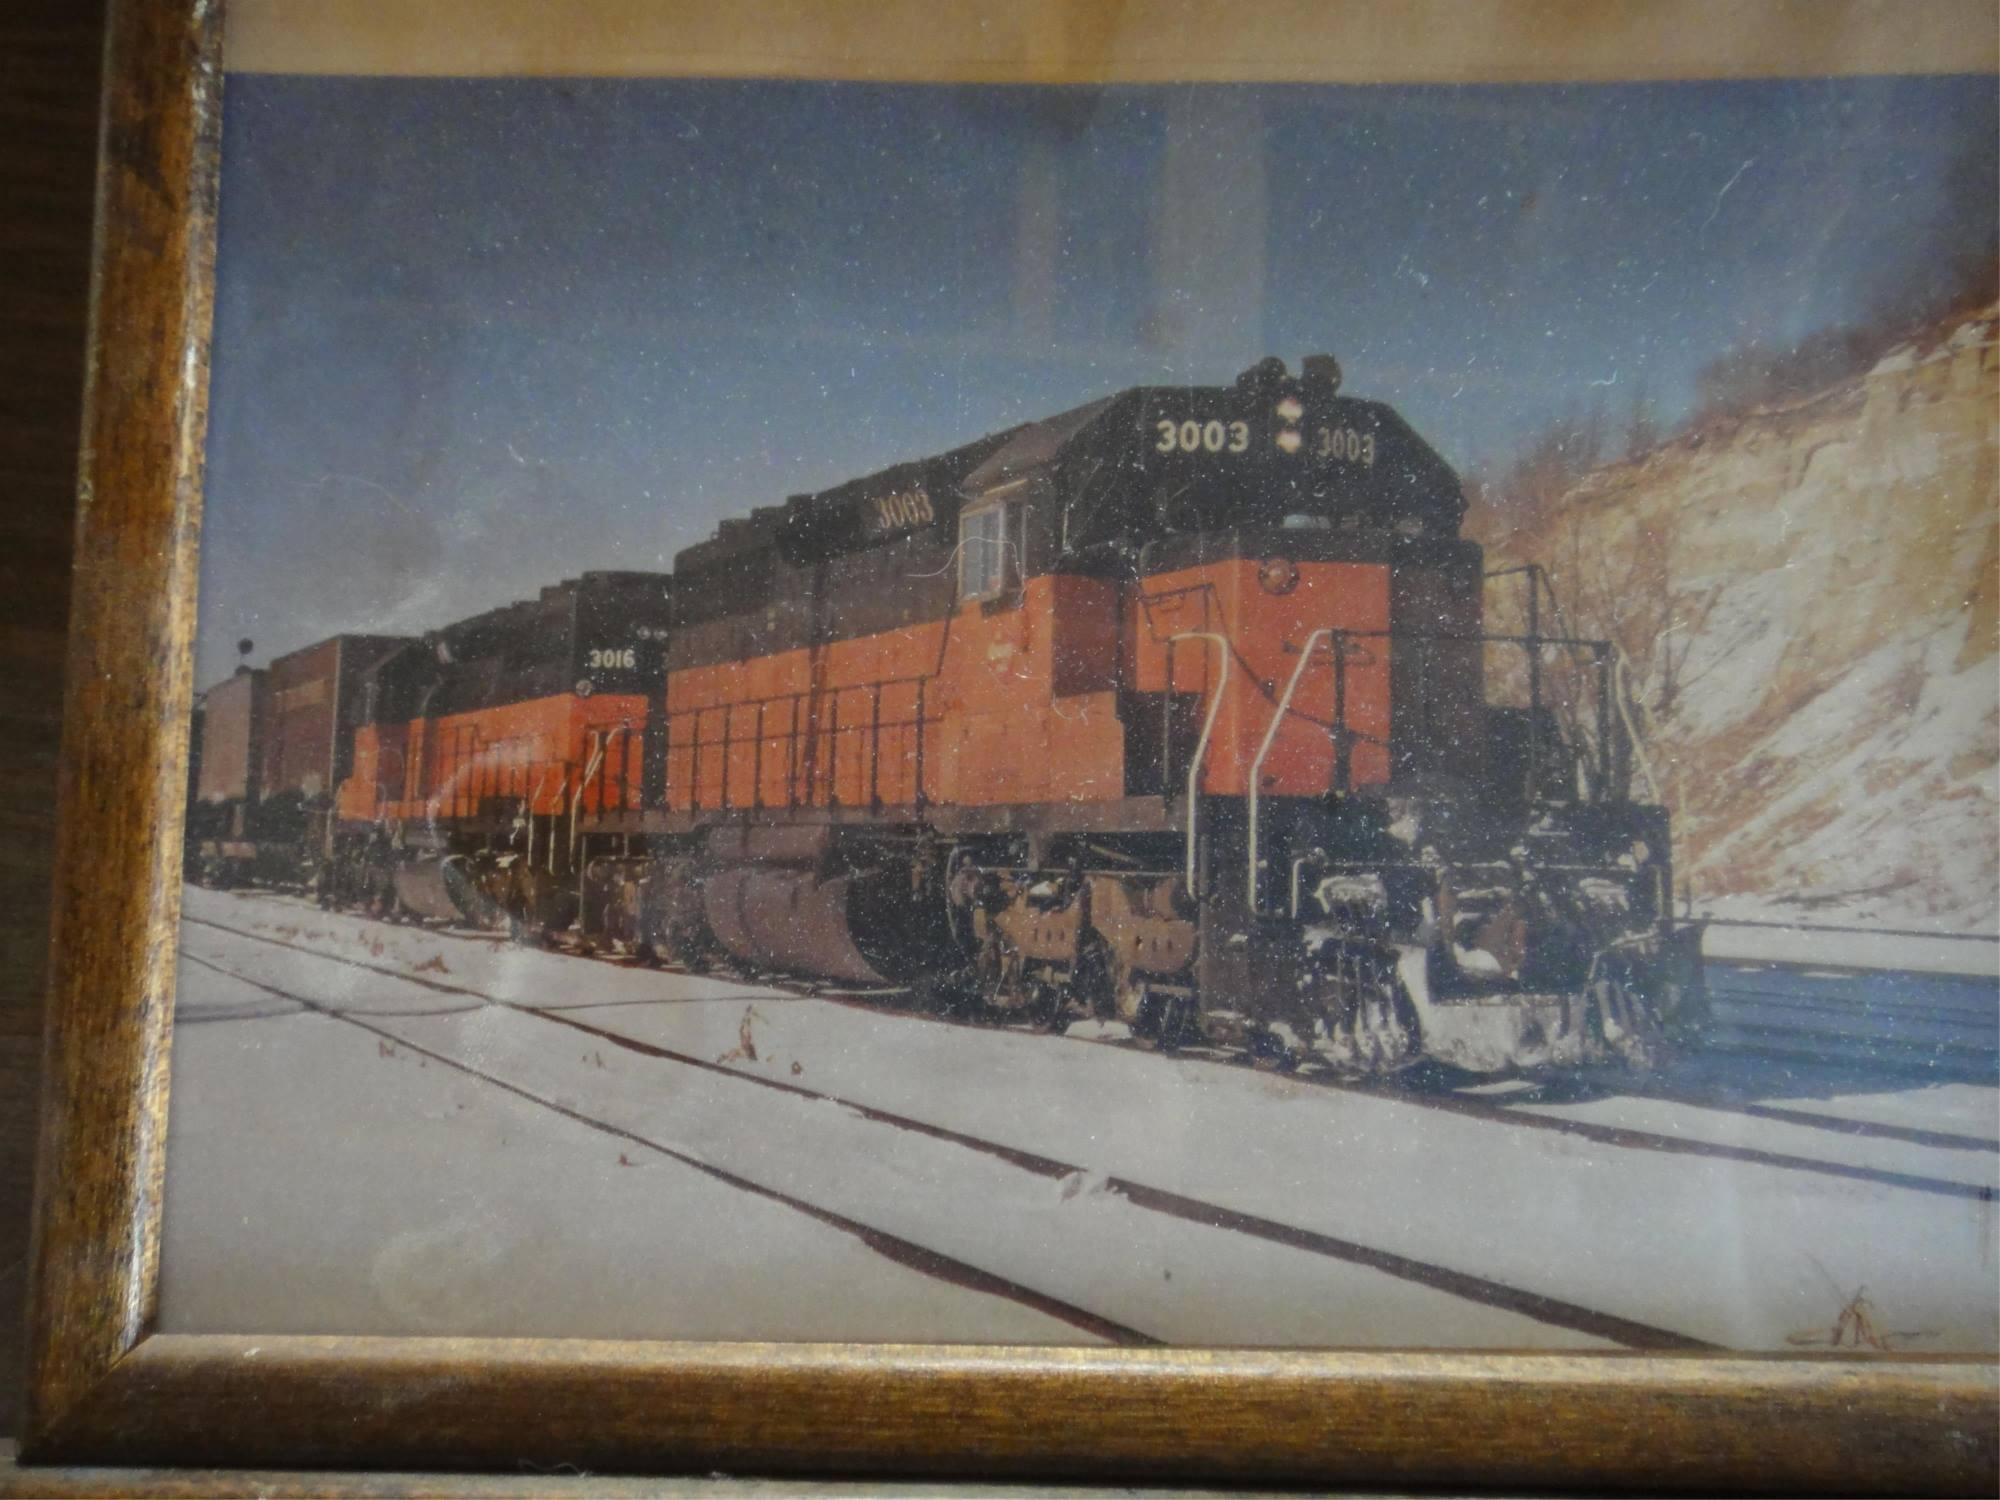 9 FRAMED TRAIN PICTURES